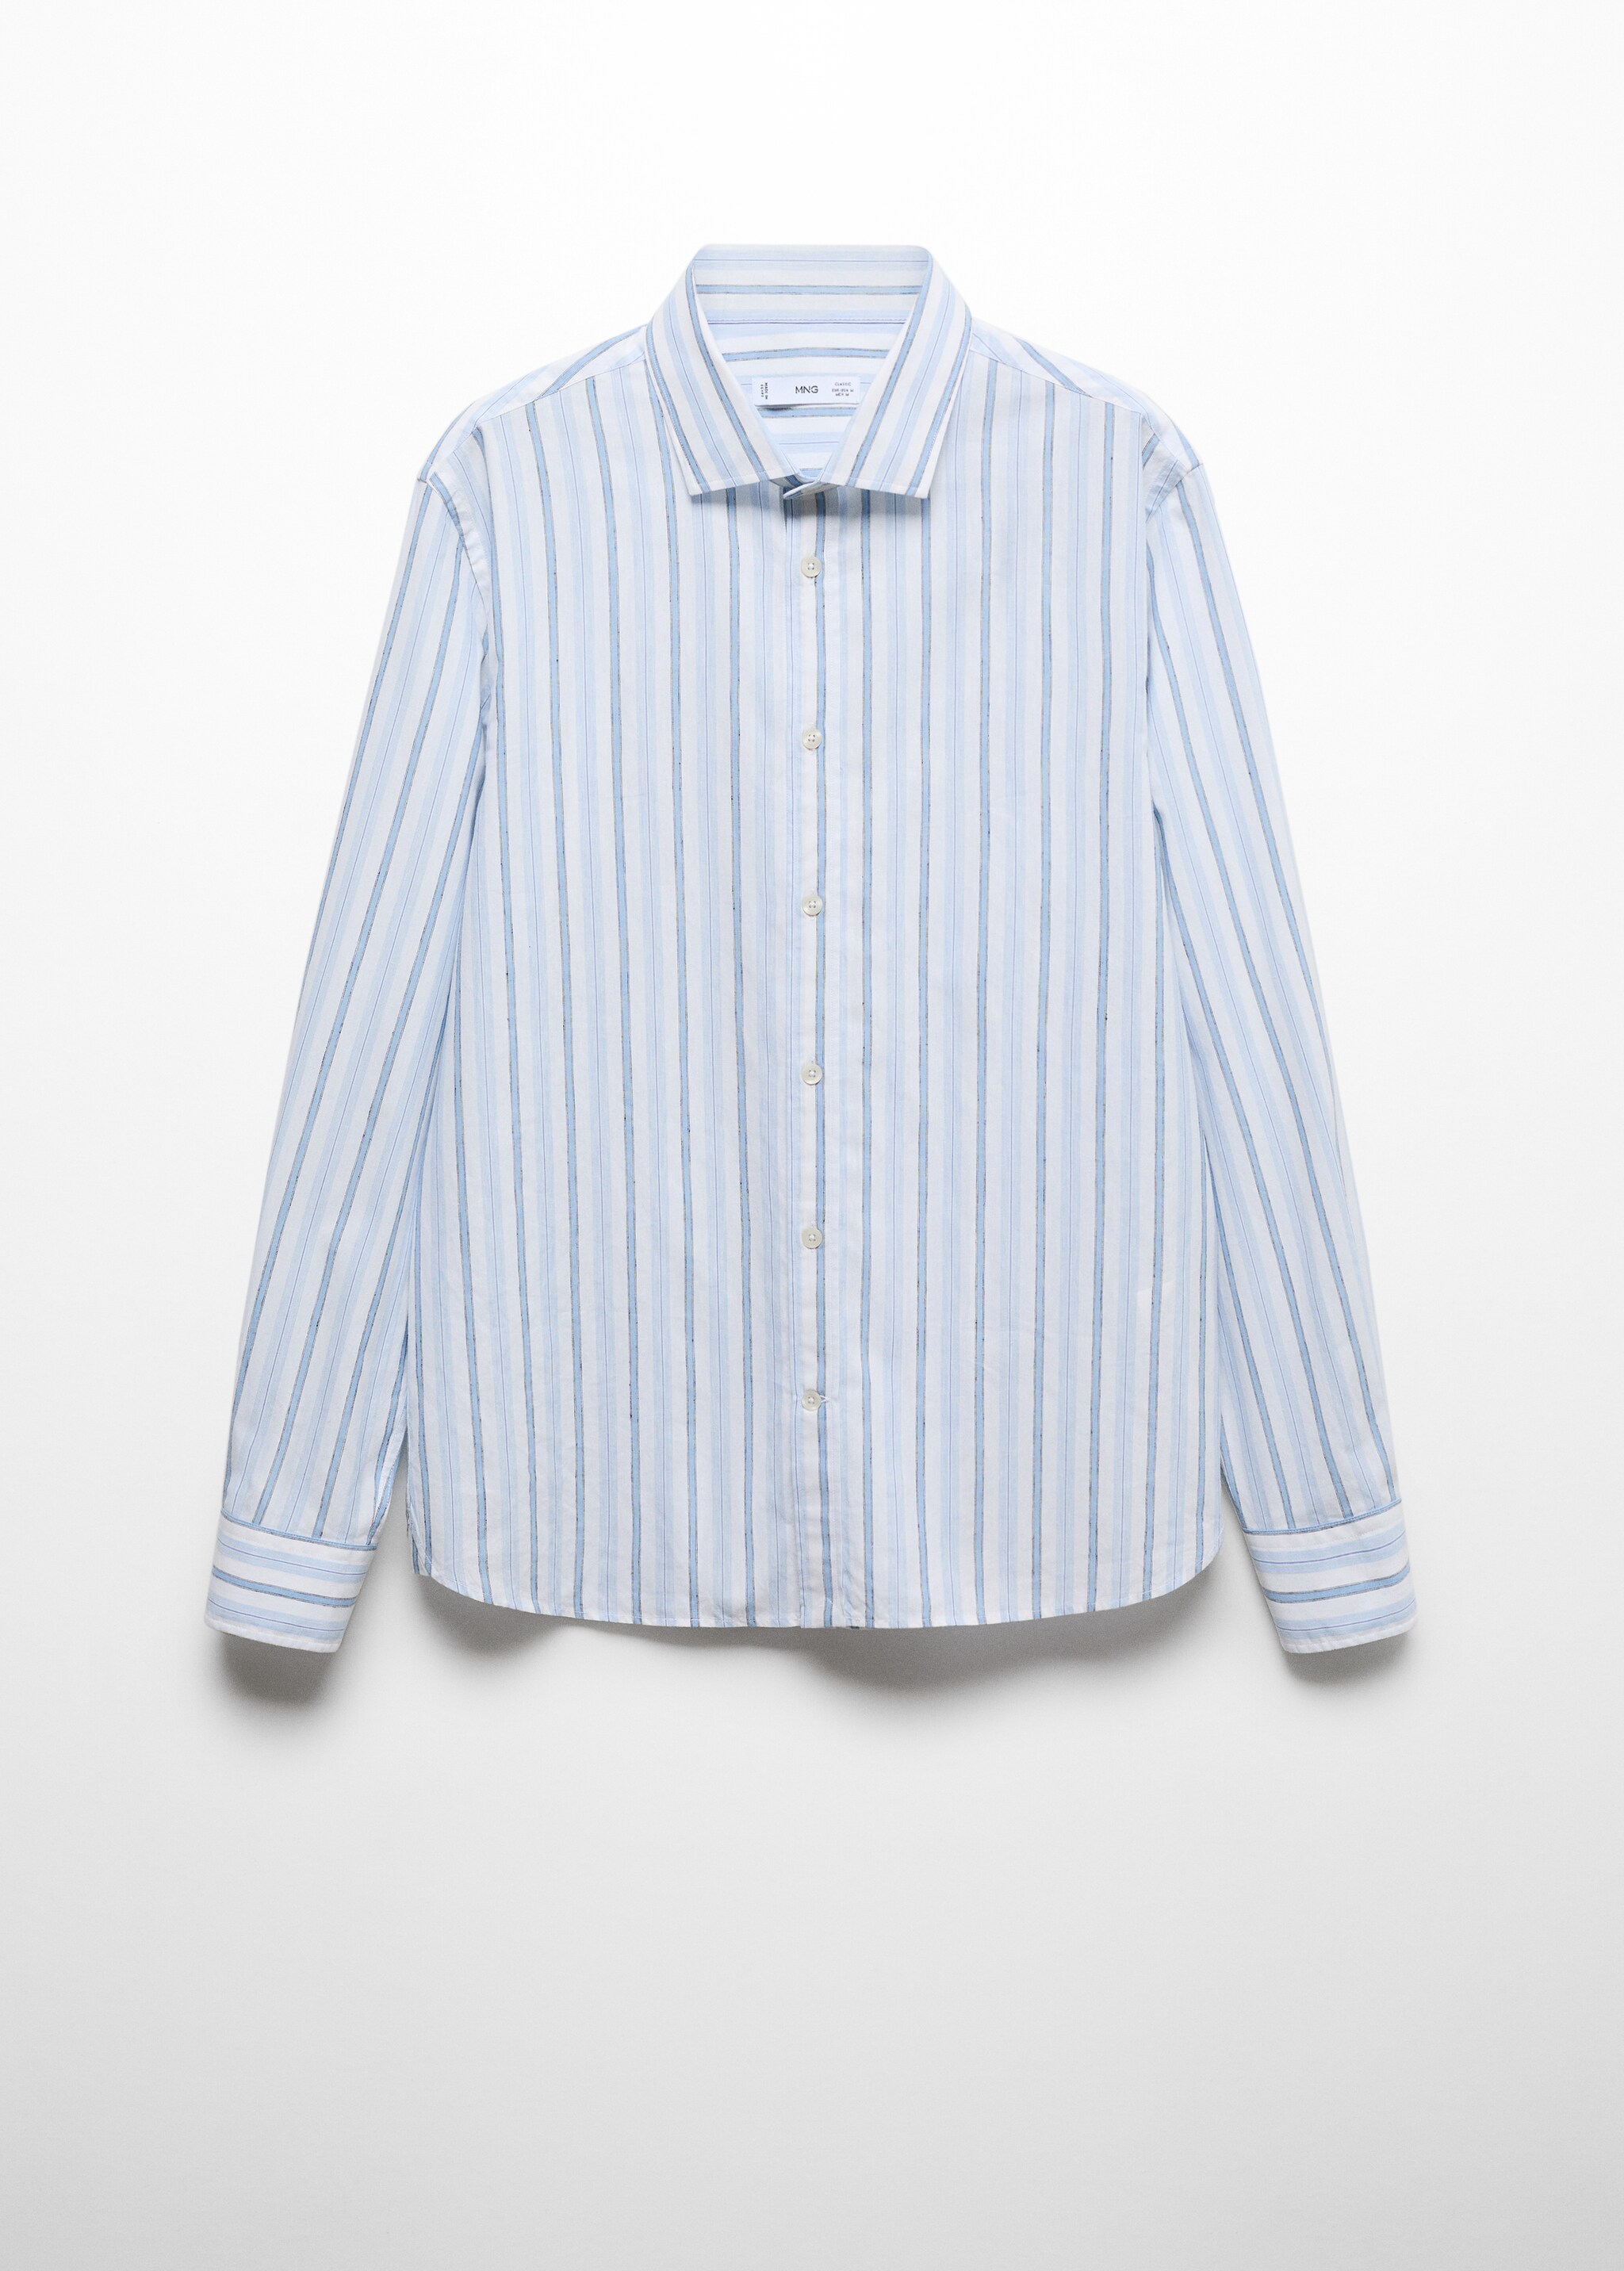 Classic fit cotton linen rustic striped shirt - Article without model